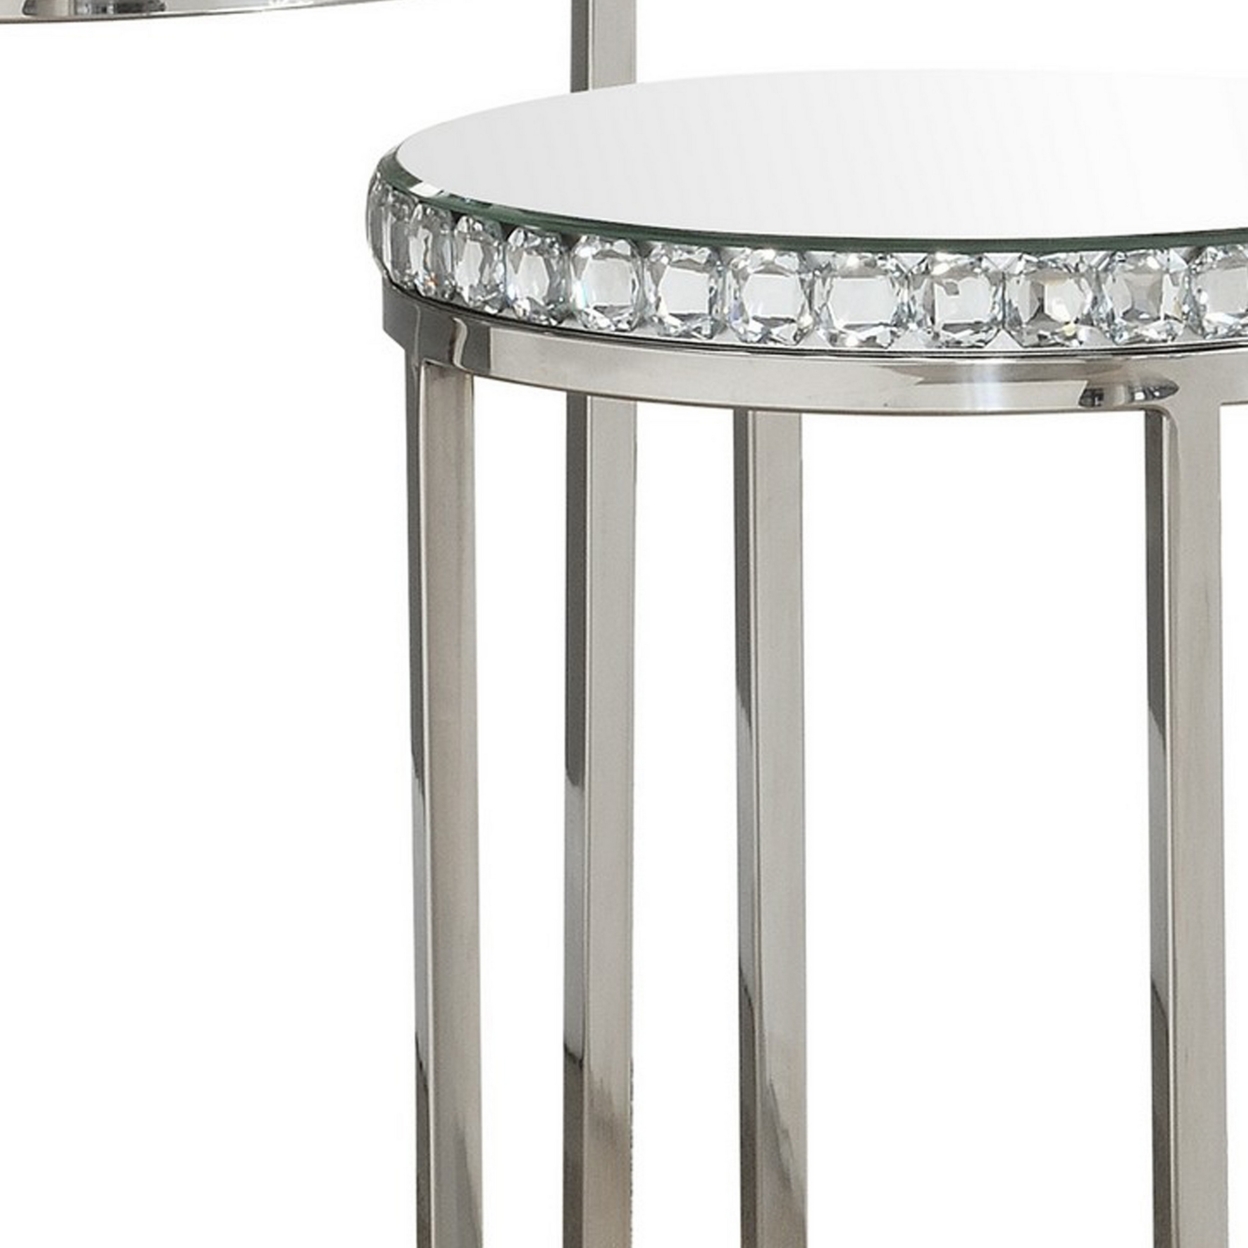 24 Inch Nesting Accent Tables, Mirrored Gemstone Trim, Set Of 2, Silver